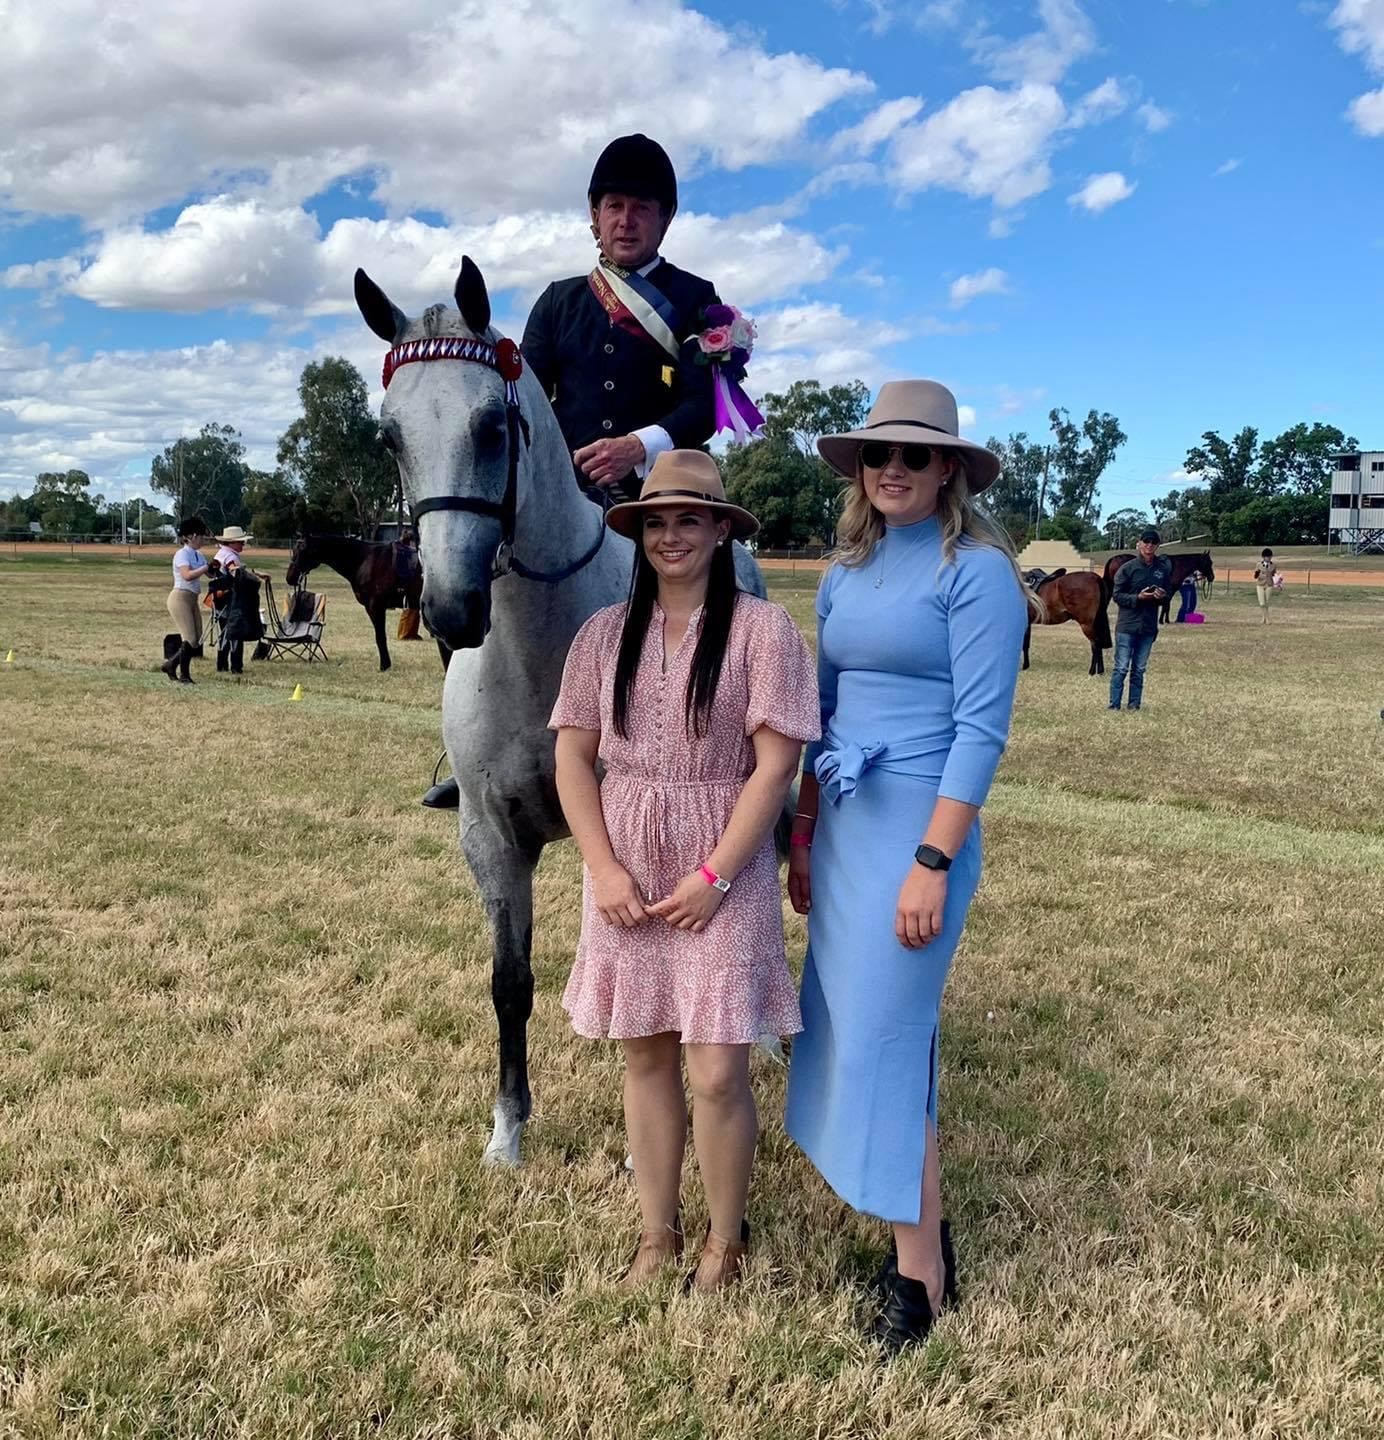 Aubrey Tribe Memorial supreme rider was awarded to Damien Judd. He is with judges Nadine Finney and Katrina Gorman.